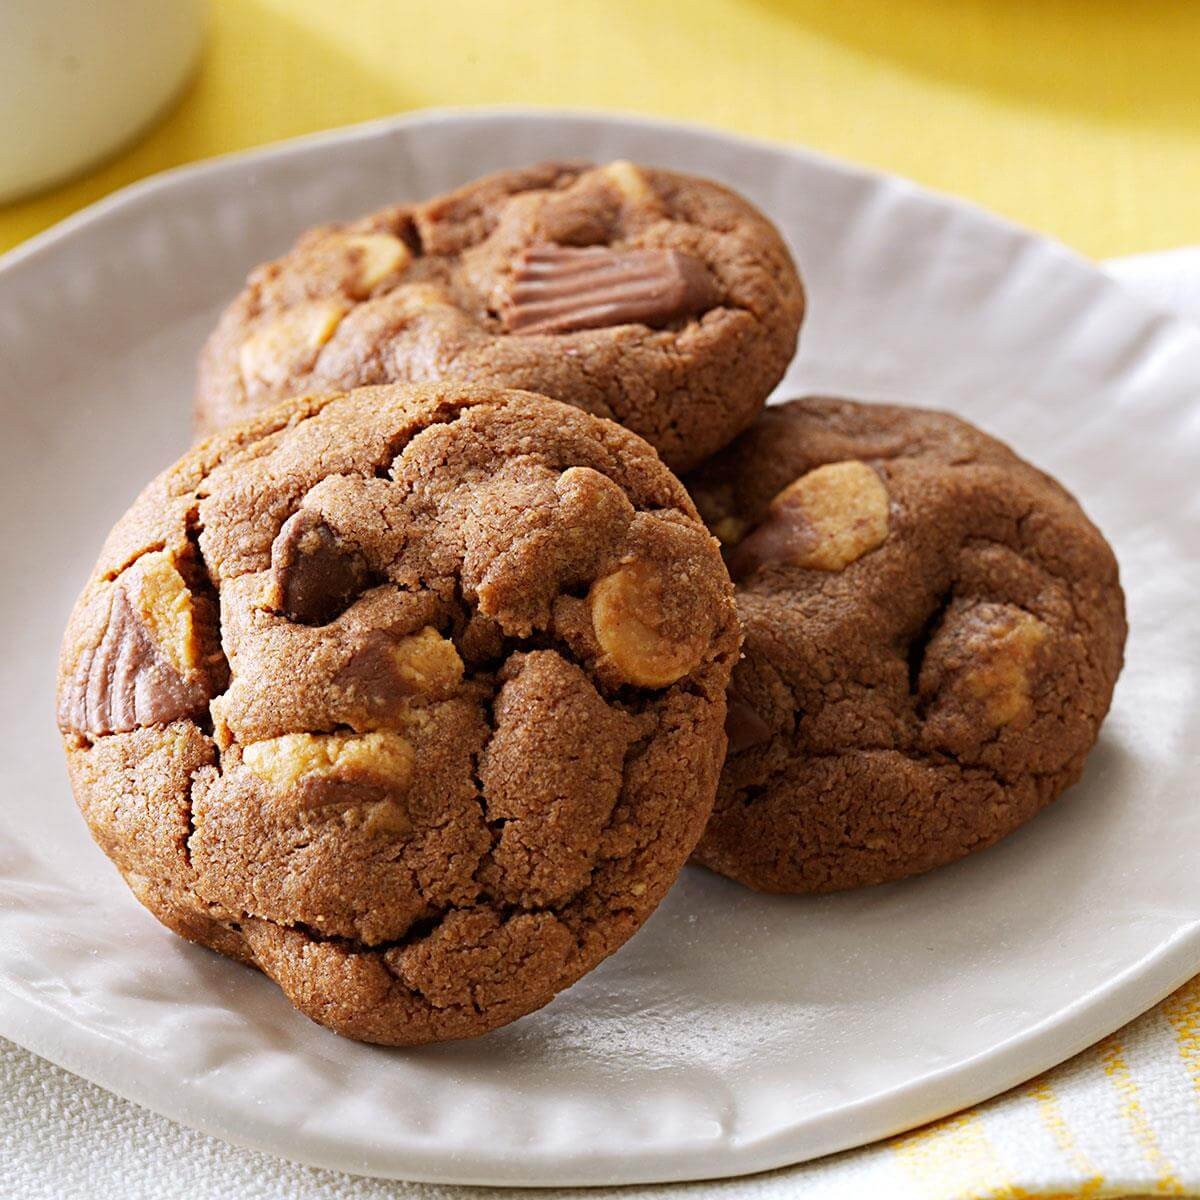 Peanut Butter Cookies With Peanut Butter Cups
 Chocolate Peanut Butter Cup Cookies Recipe